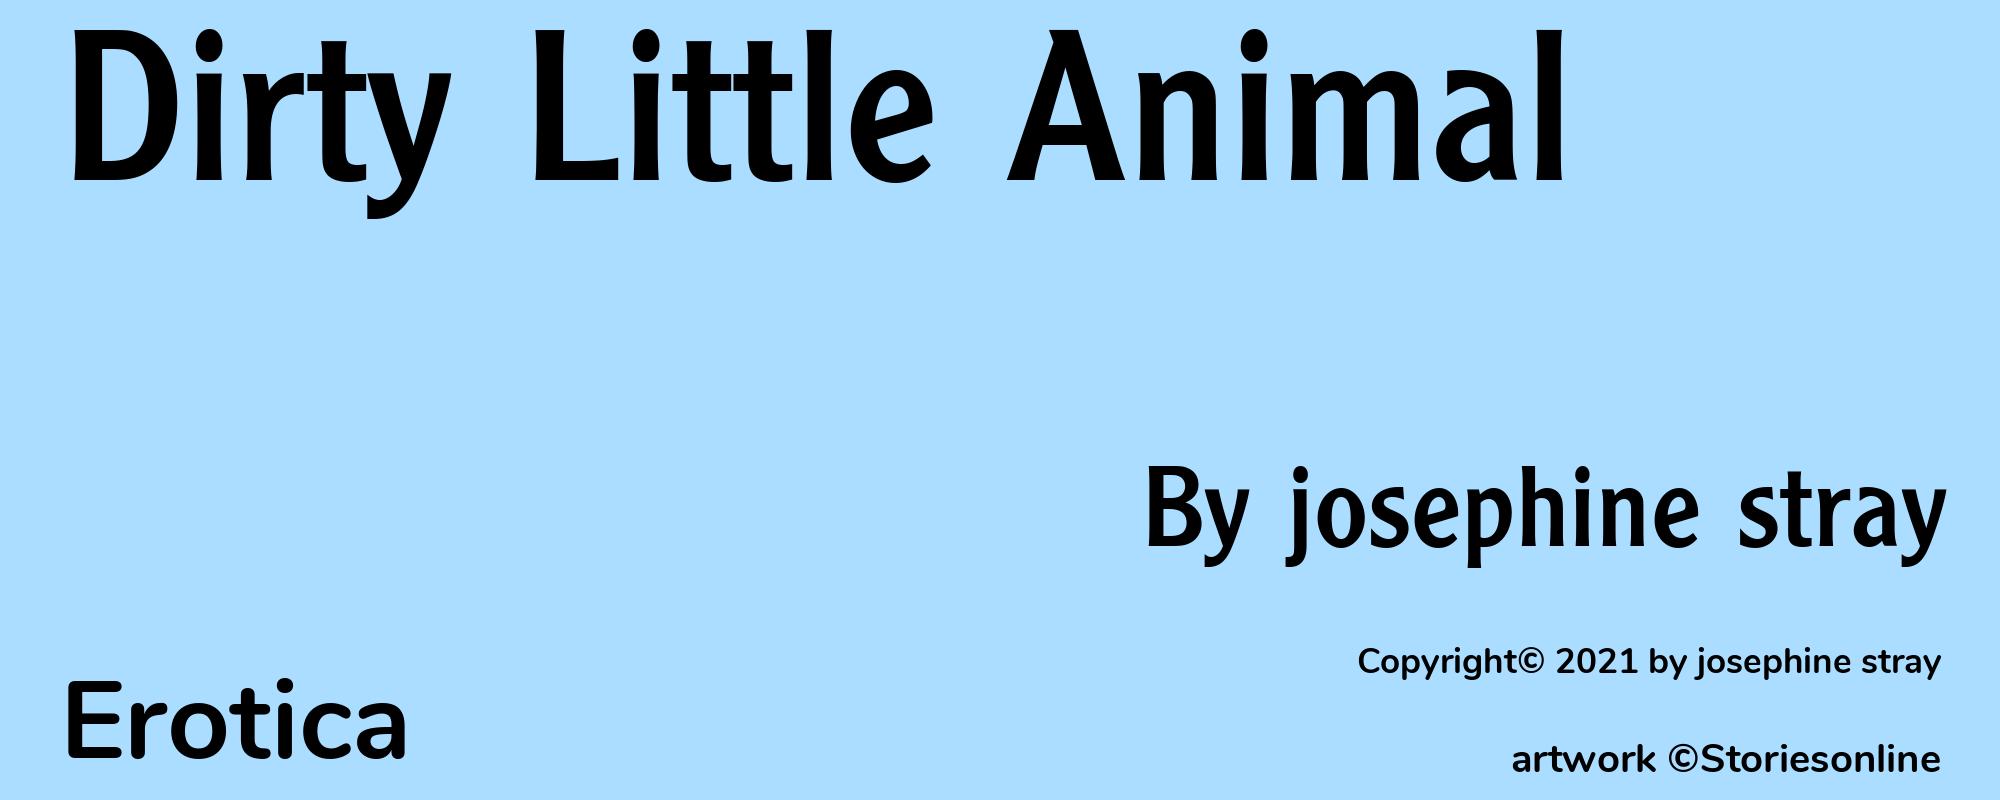 Dirty Little Animal - Cover